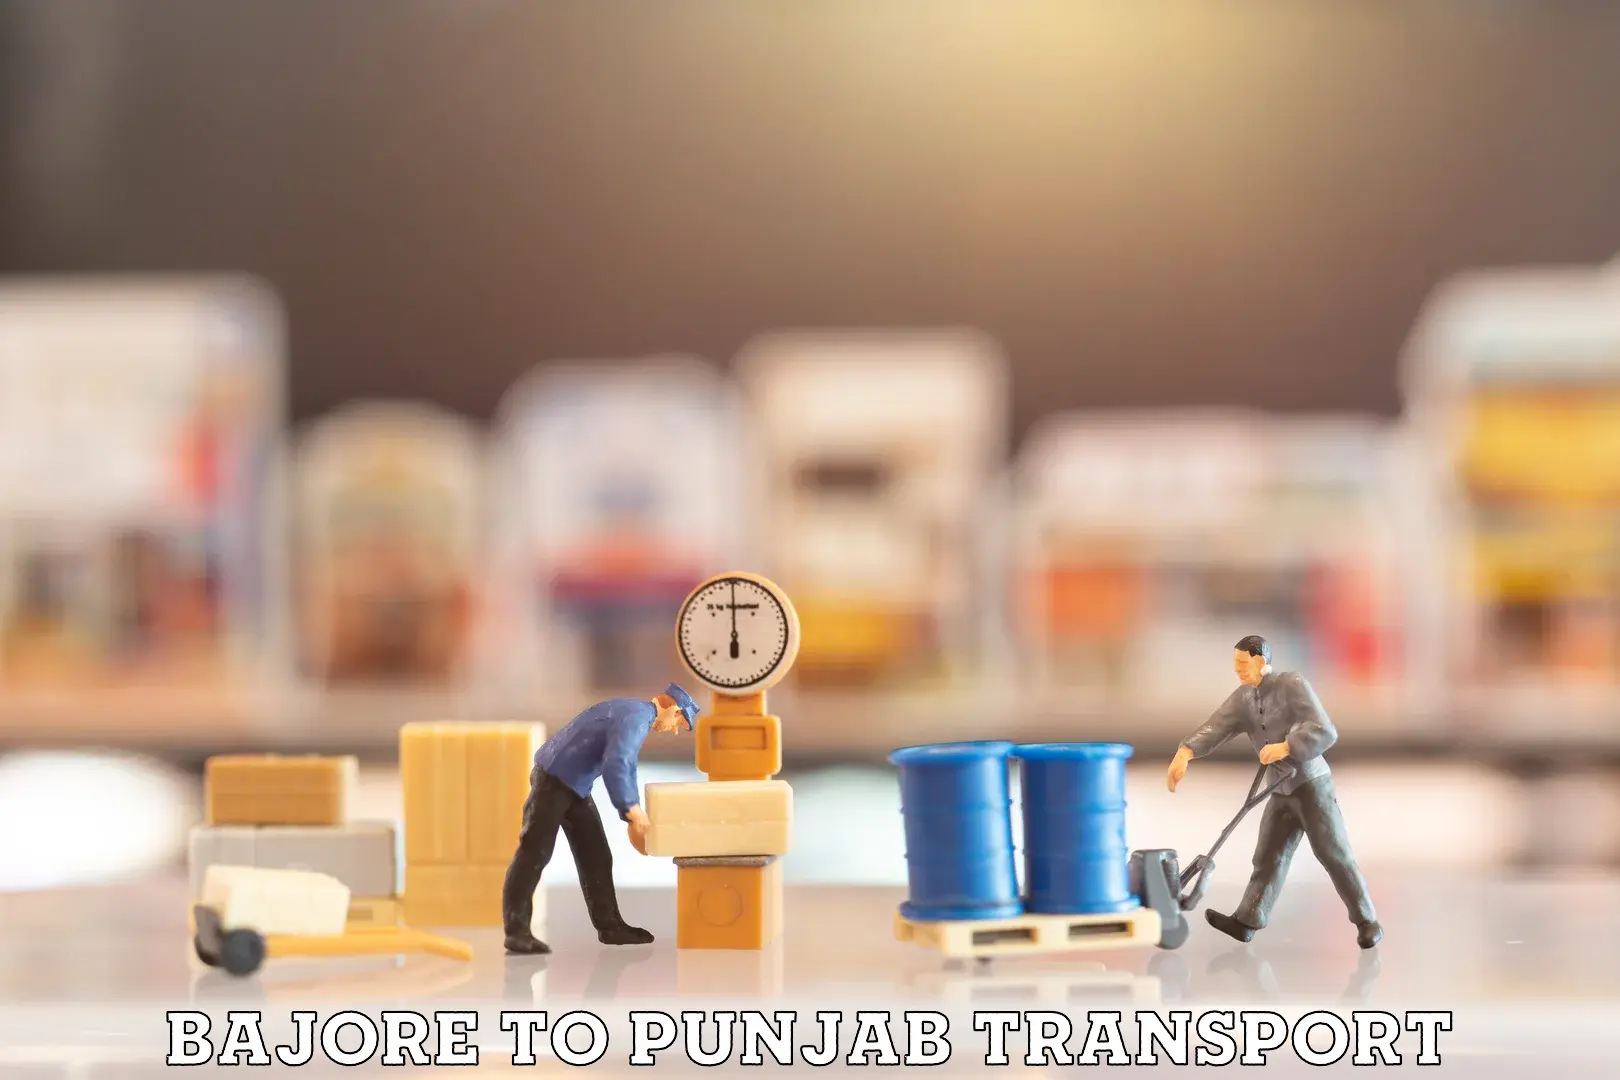 Daily transport service Bajore to Punjab